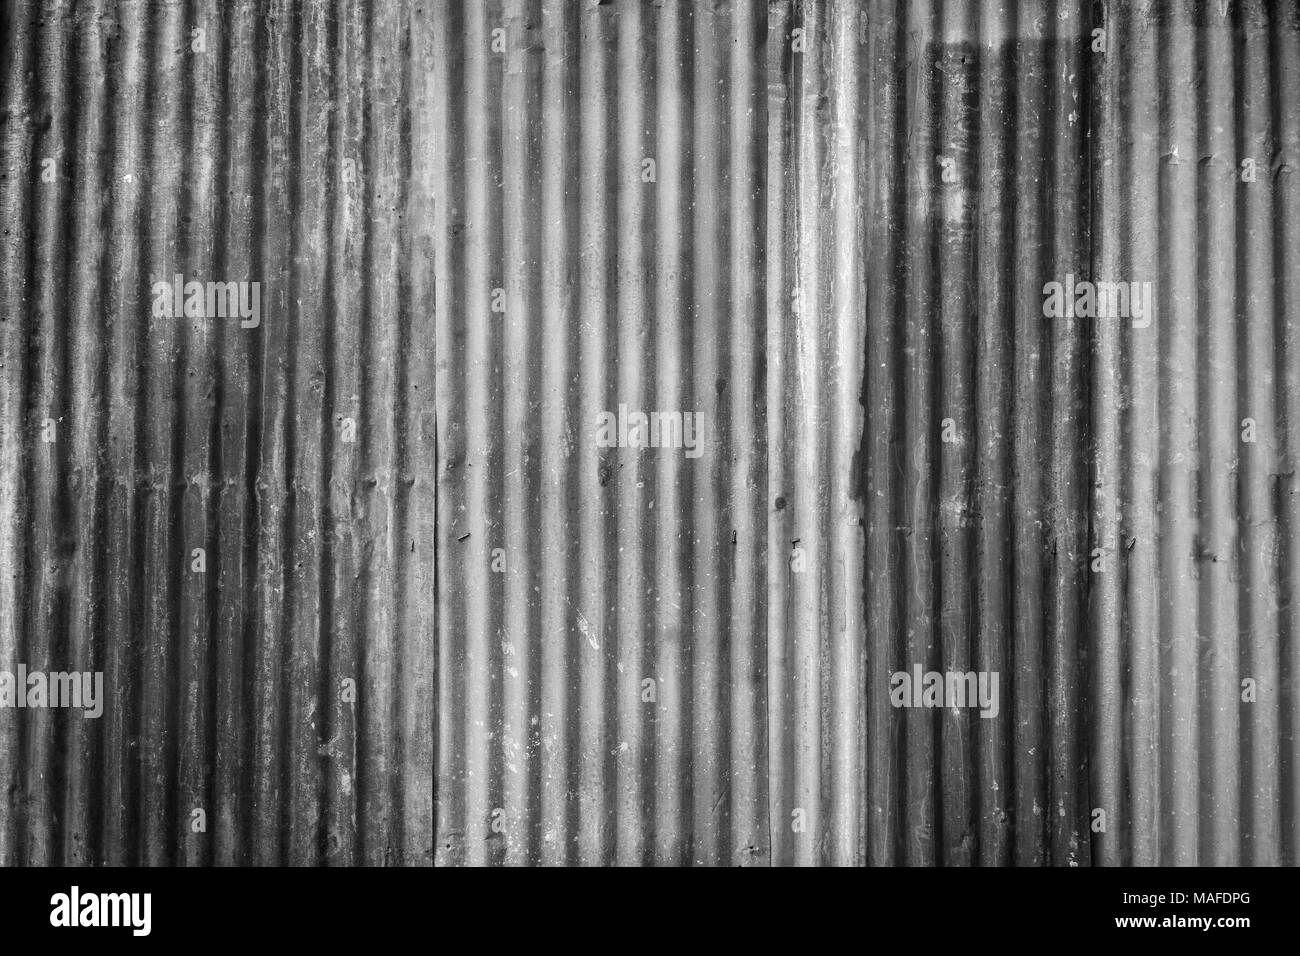 Rusty and corrugated iron metal construction site wall texture background with vignette in black and white. Stock Photo